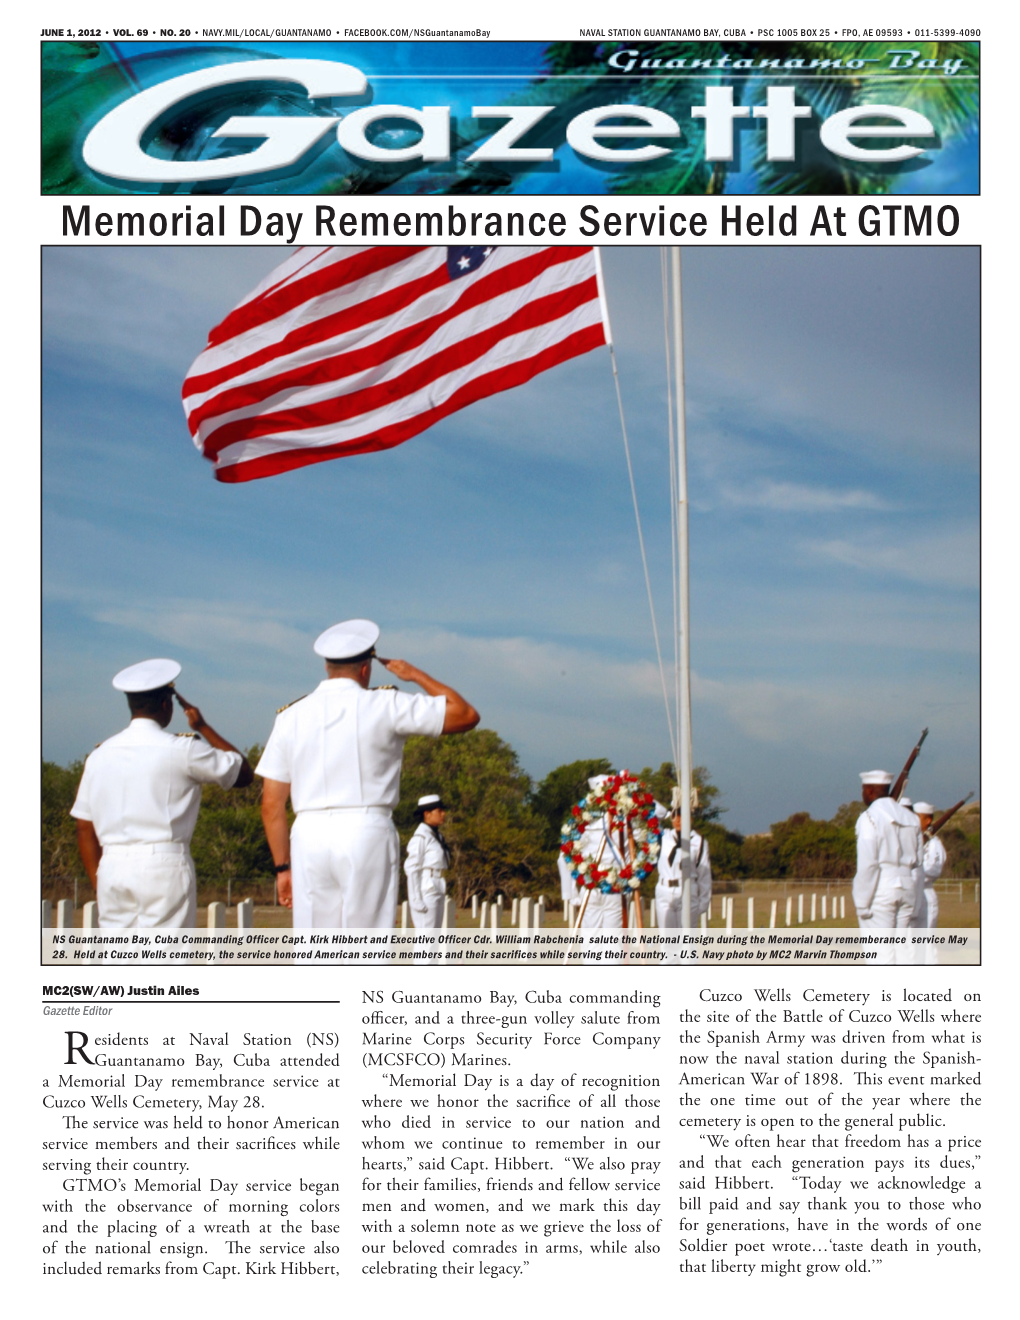 Memorial Day Remembrance Service Held at GTMO